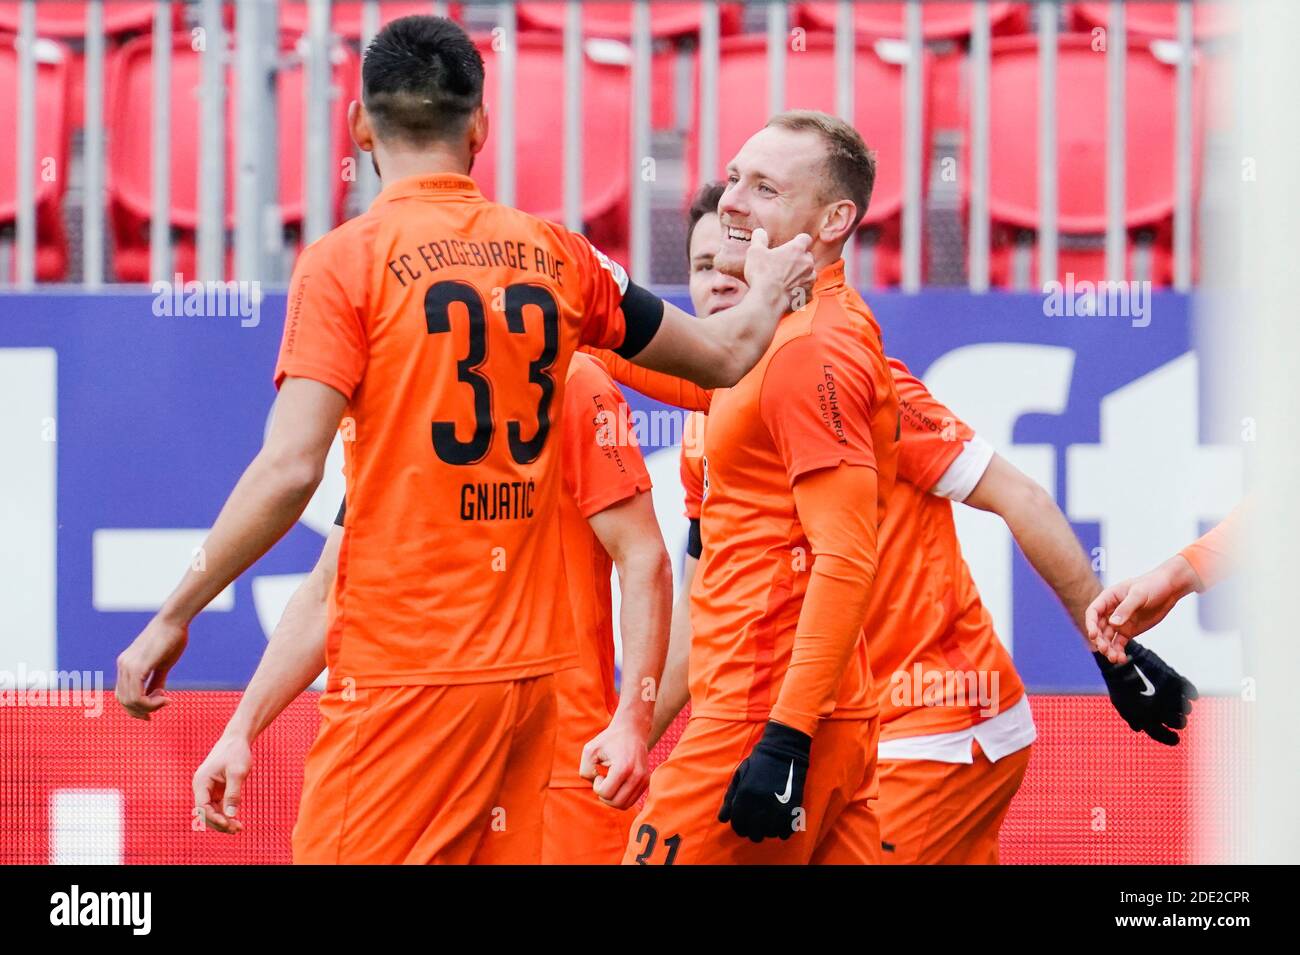 Sandhausen, Germany. 28th Nov, 2020. Football: 2nd Bundesliga, SV Sandhausen - FC Erzgebirge Aue, 9th matchday, Hardtwaldstadion. Goalscorer Ben Zolinski (r) from Erzgebirge Aue cheers with Ognjen Gnjatic from Erzgebirge Aue about the goal for the 1:2. Credit: Uwe Anspach/dpa - IMPORTANT NOTE: In accordance with the regulations of the DFL Deutsche Fußball Liga and the DFB Deutscher Fußball-Bund, it is prohibited to exploit or have exploited in the stadium and/or from the game taken photographs in the form of sequence images and/or video-like photo series./dpa/Alamy Live News Stock Photo